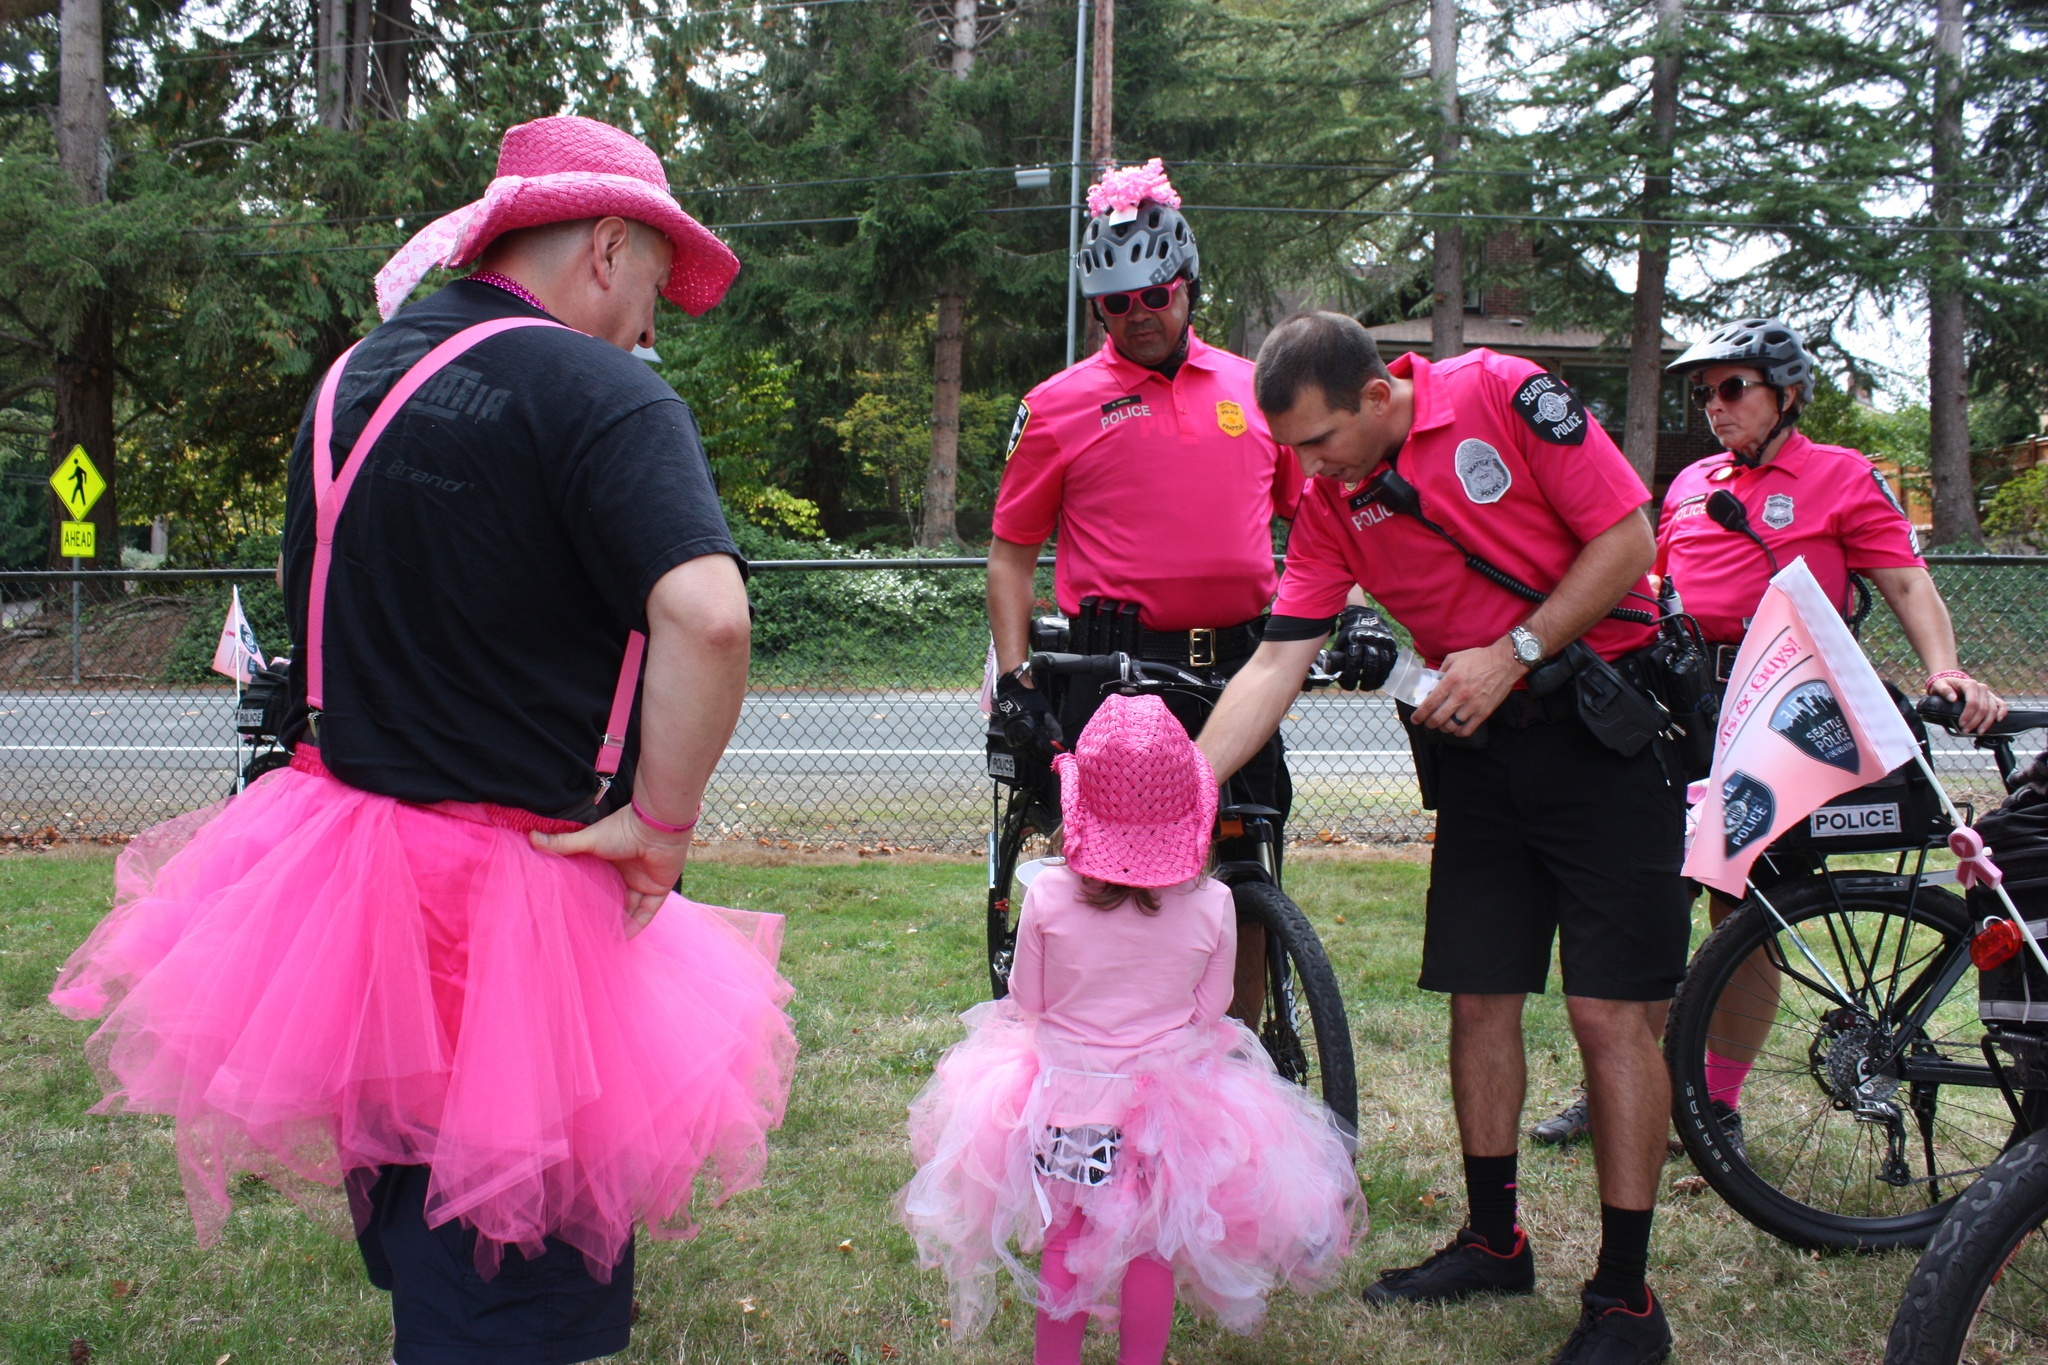 A young girl offers candy to Seattle bicycle police officers to thank them for riding inthe Susan G. Komen 3-Day.